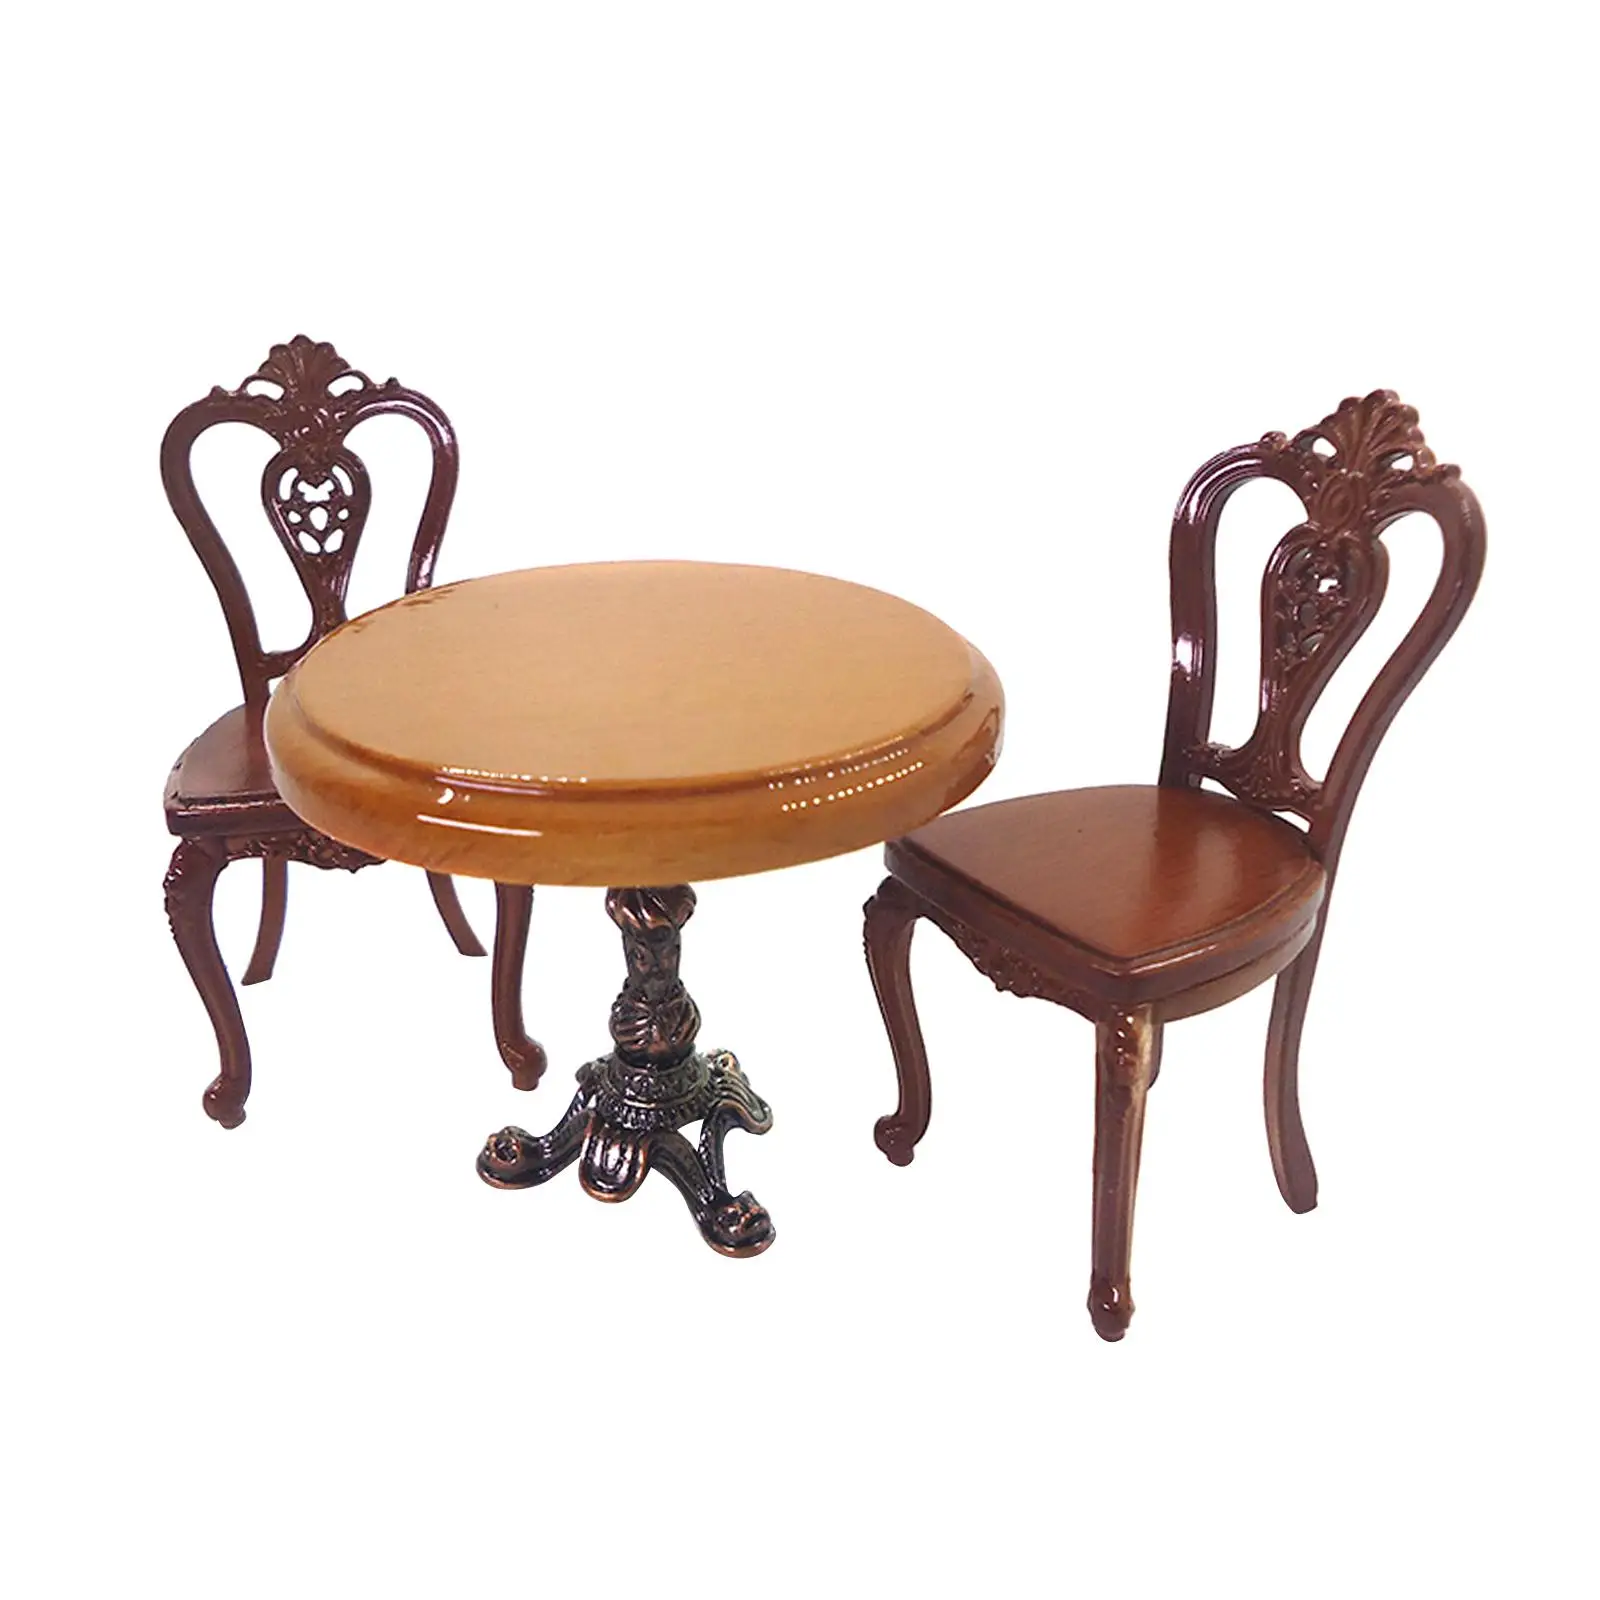 3x 1/12 Wooden Round Table and Chairs Life Scene Furniture Kitchen Decor